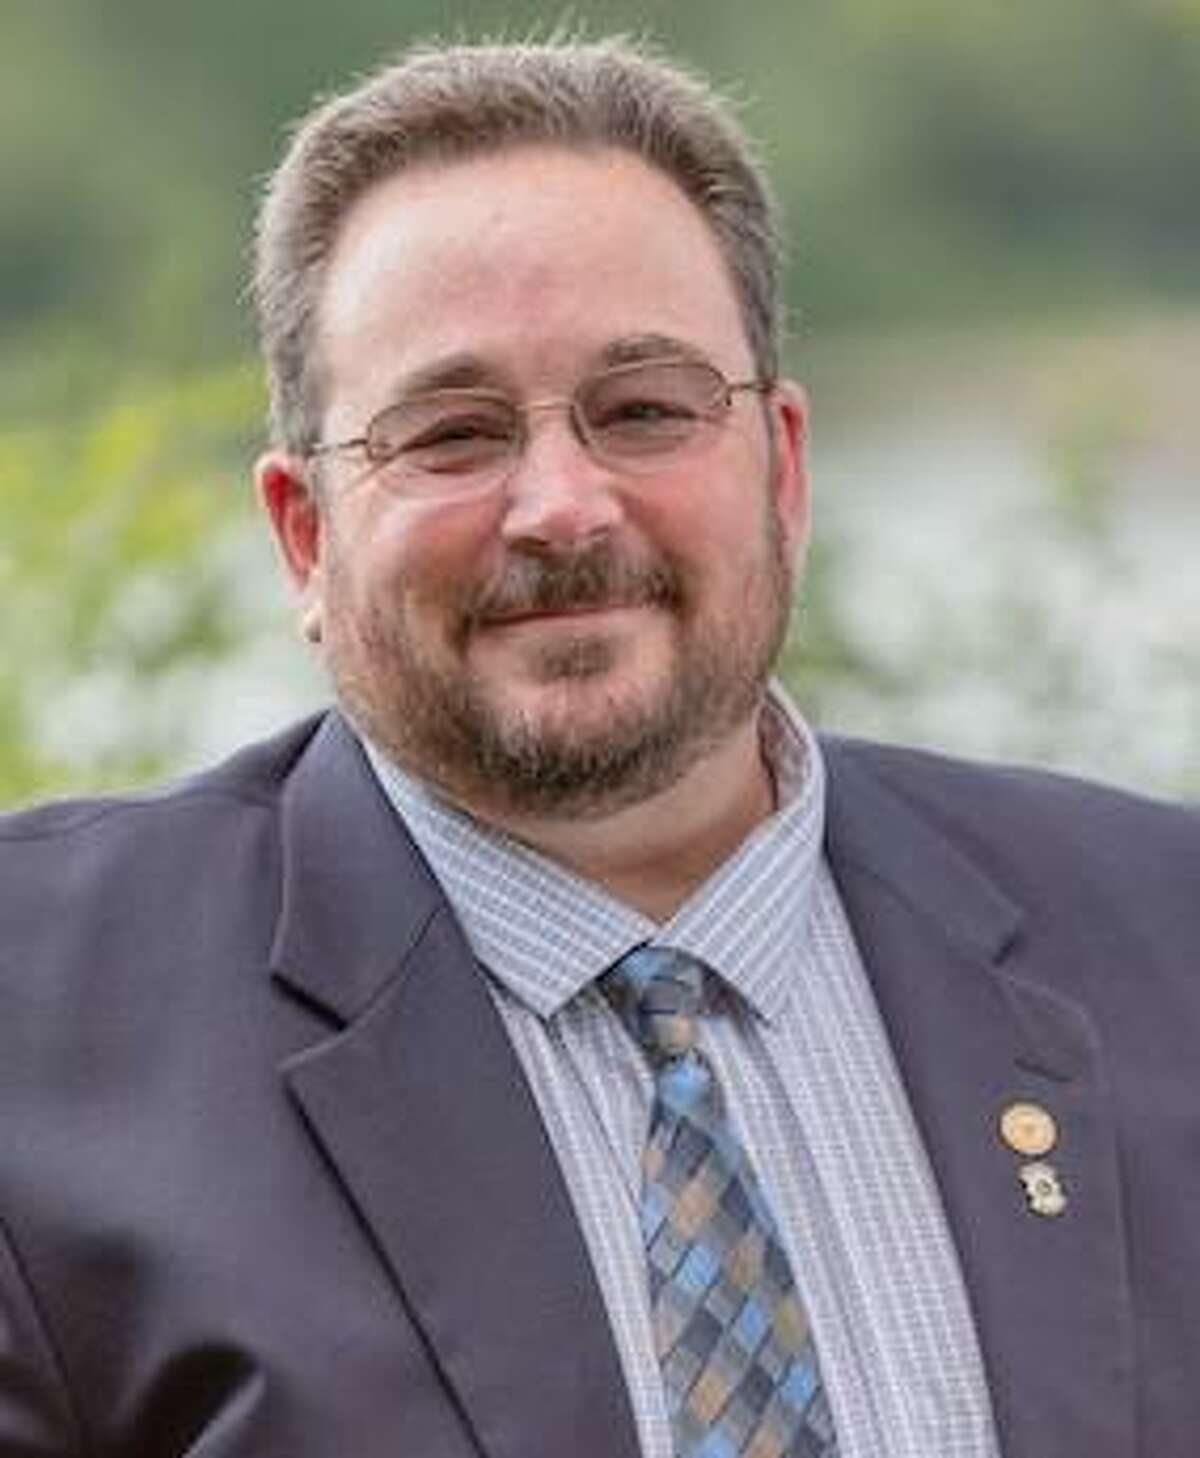 James K. Tripp announced Monday he is a candidate for first selectman.